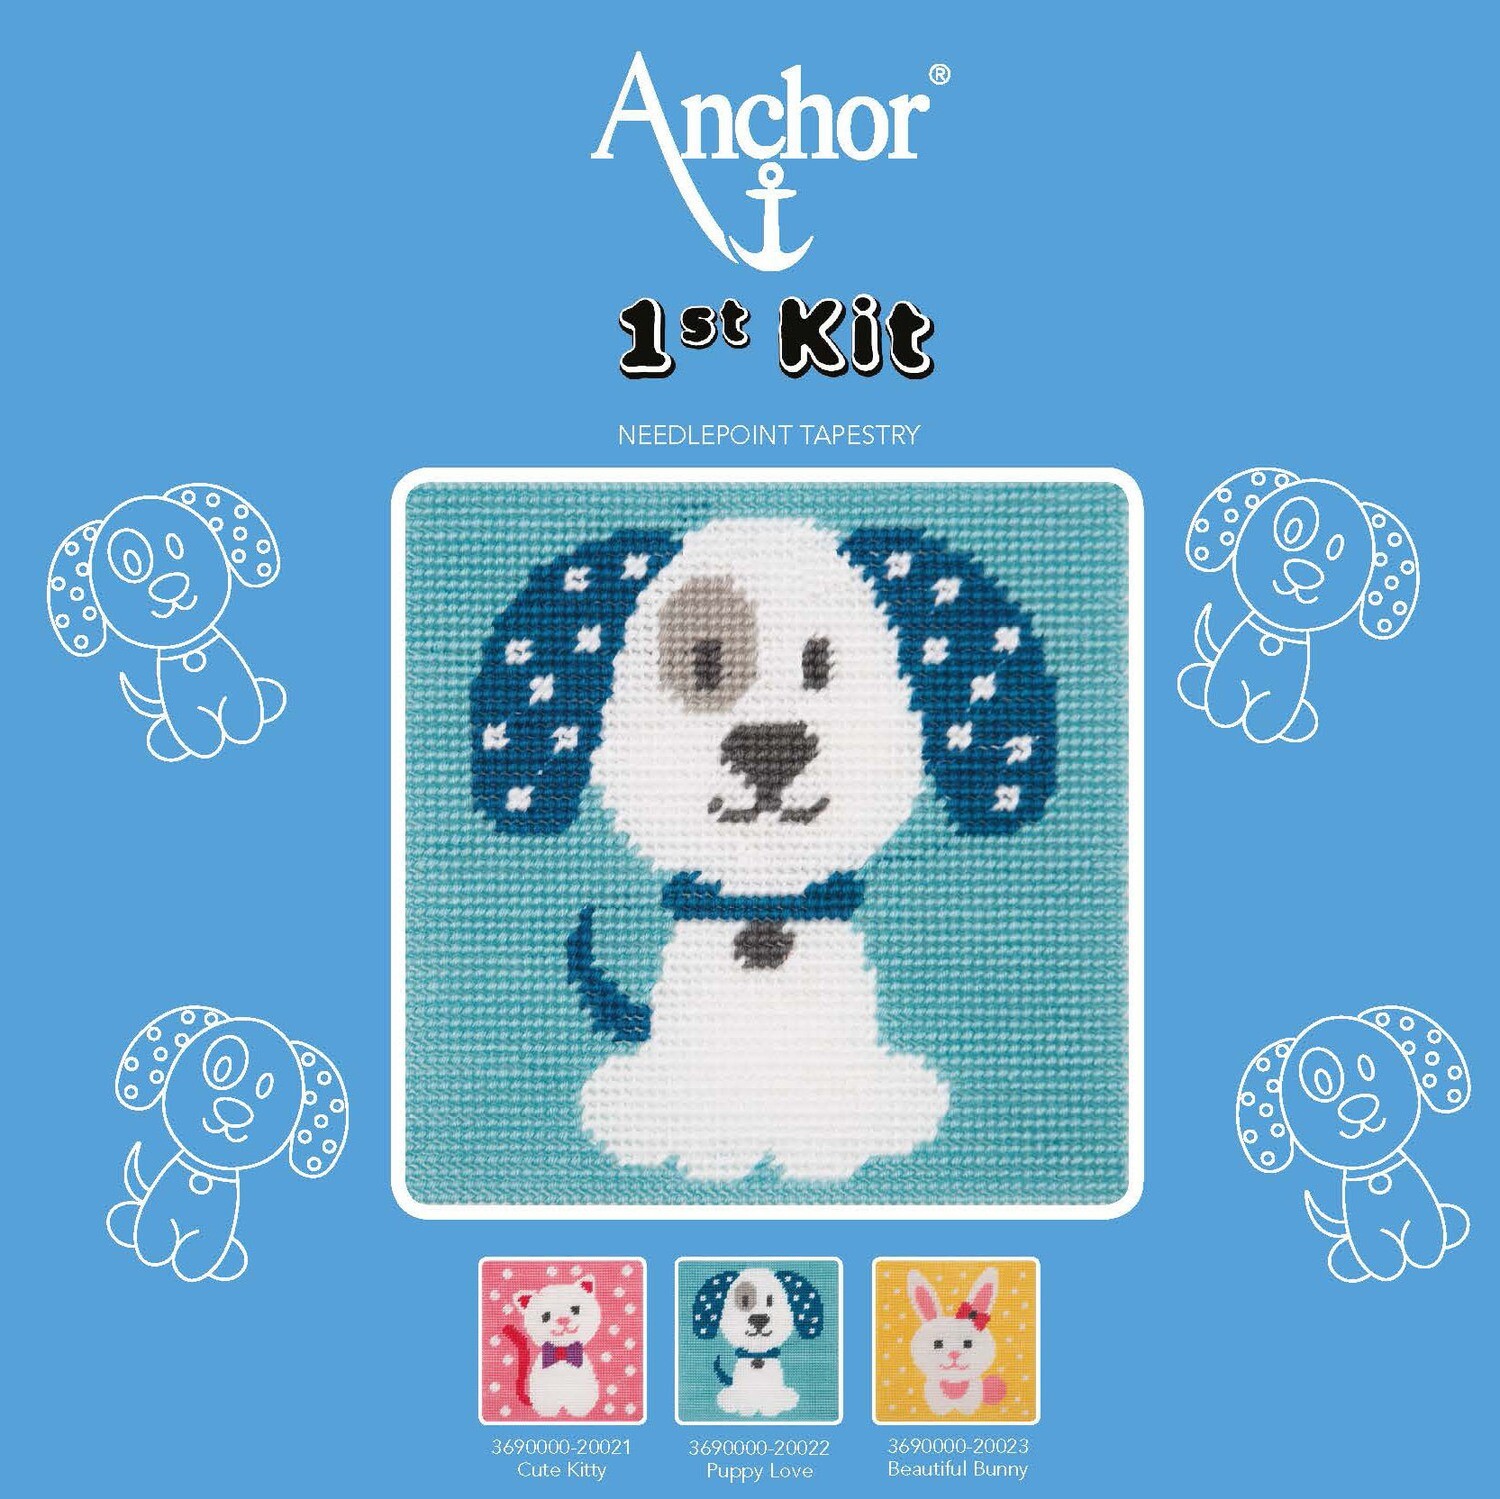 Anchor 1st Kit - Puppy Love Tapestry